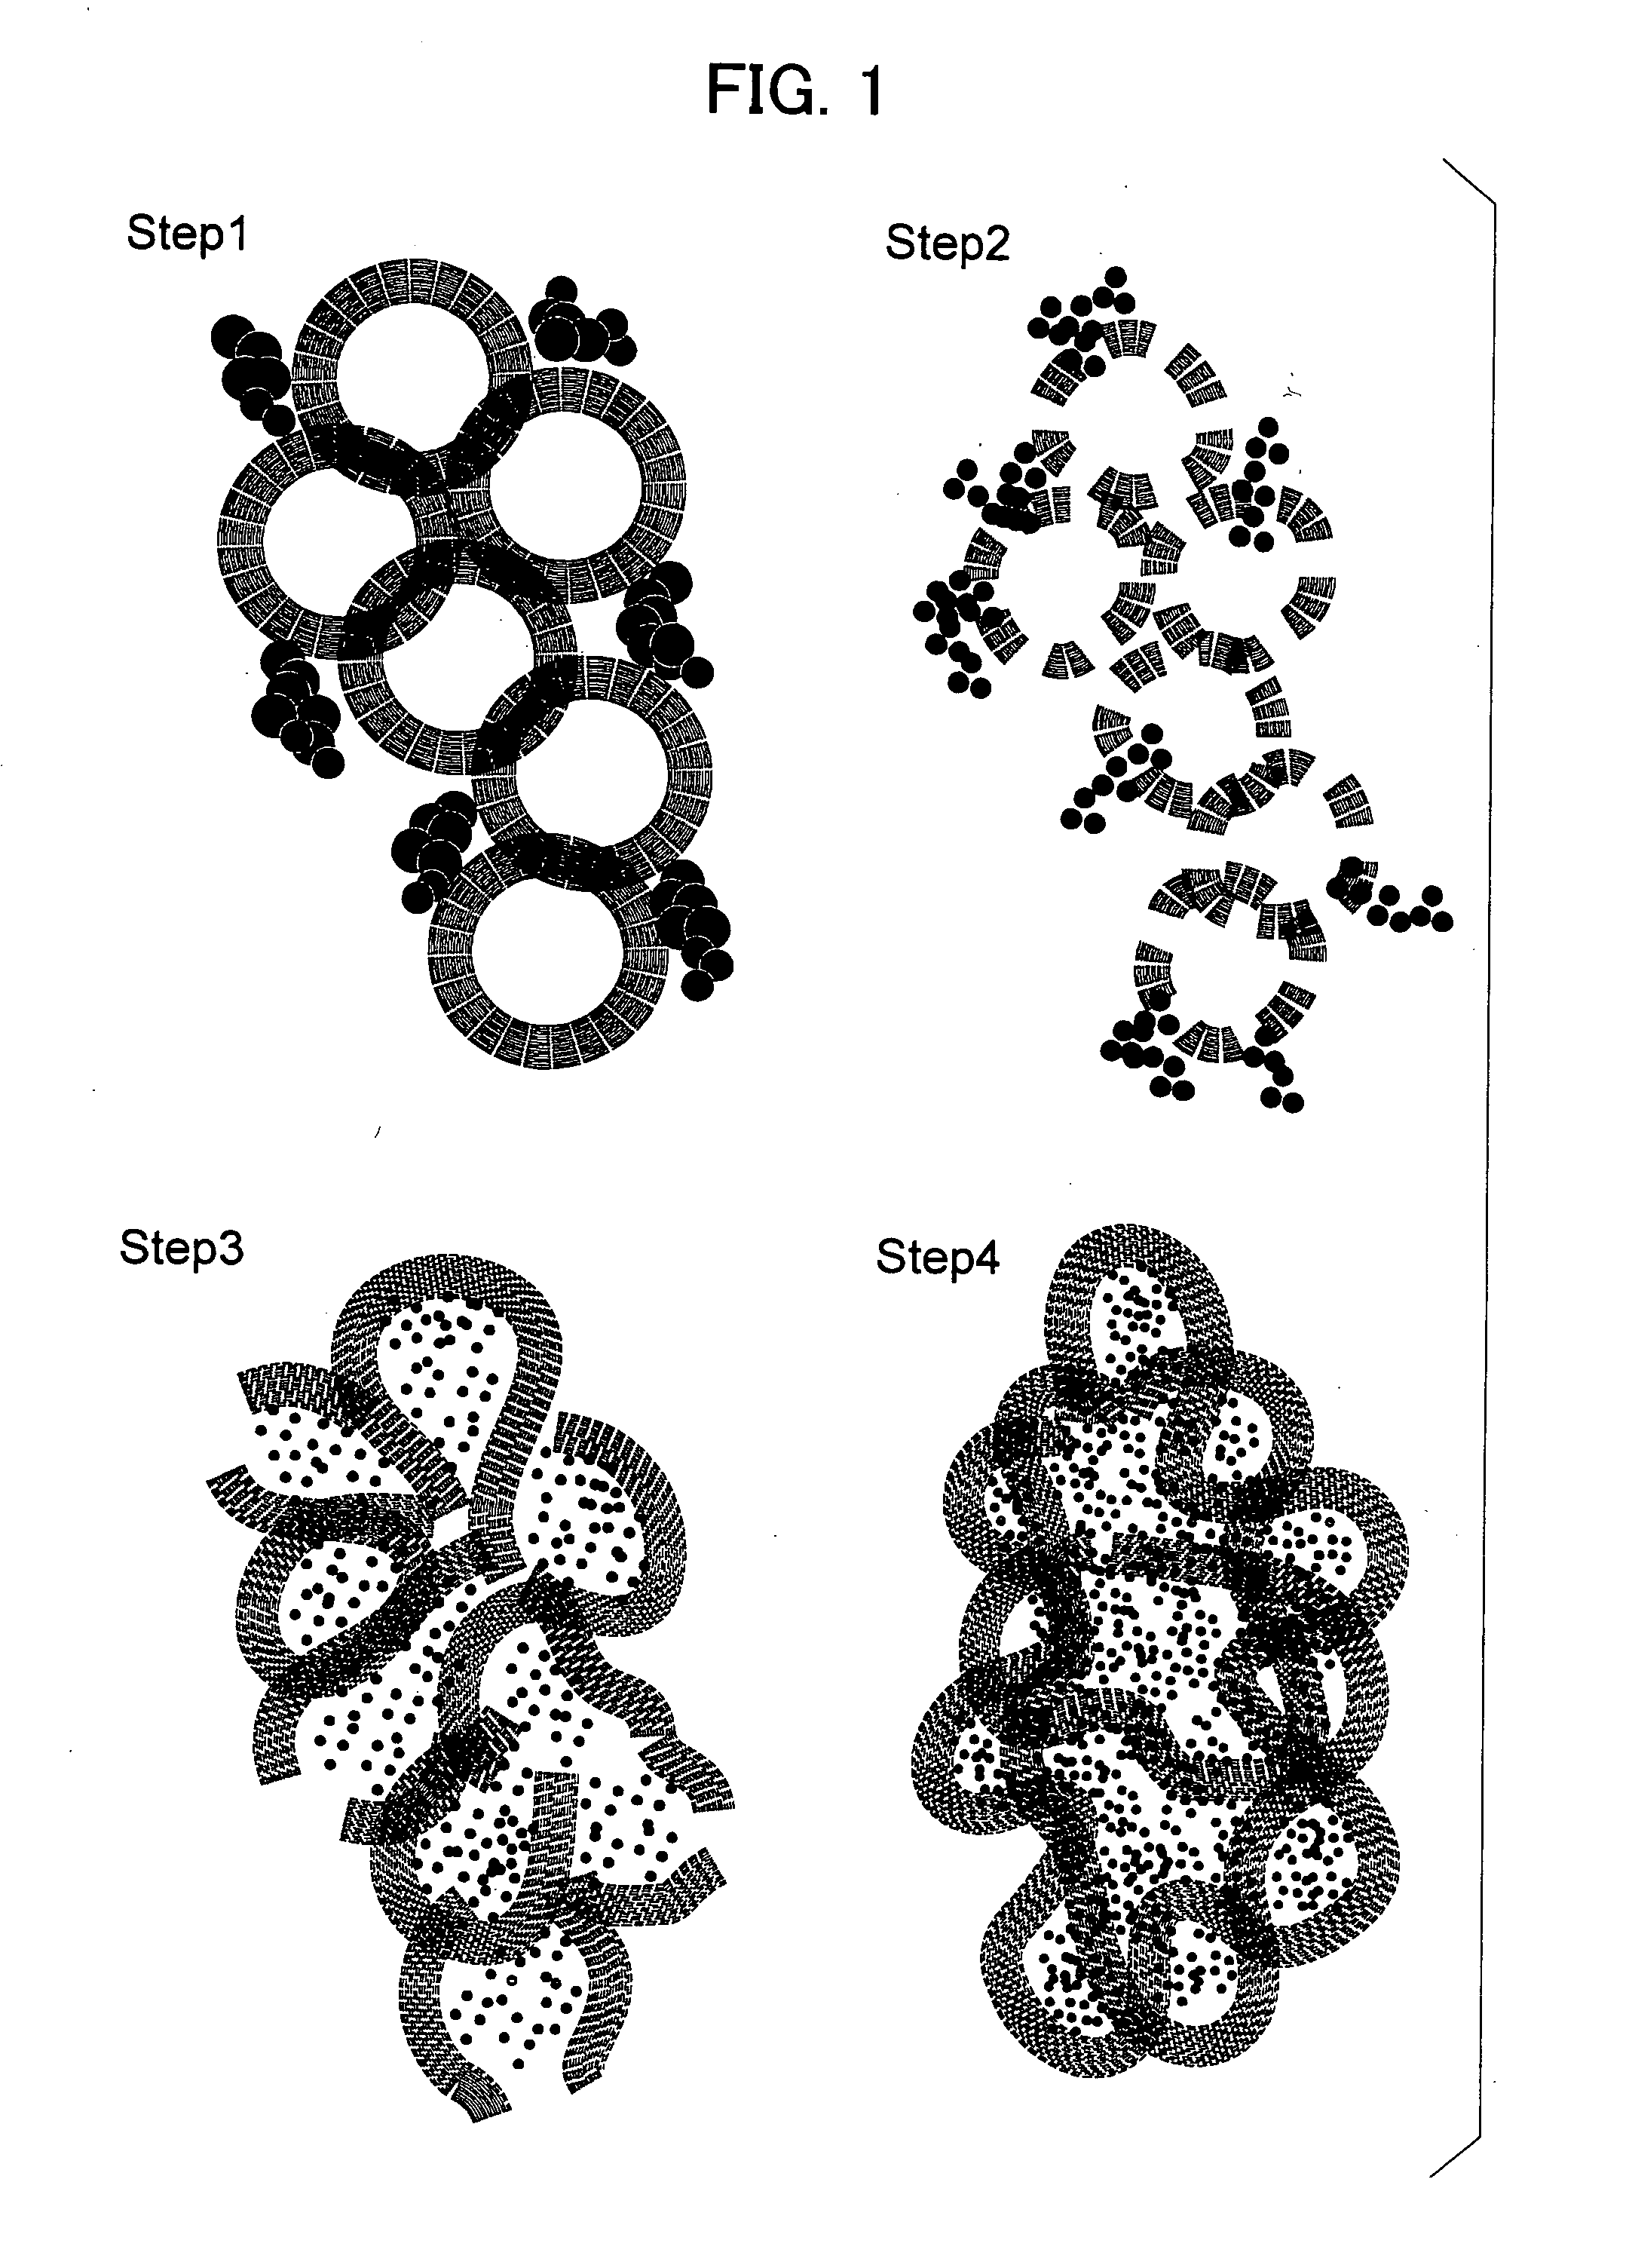 Nanocarbon Composite Structure Having Ruthenium Oxide Trapped Therein